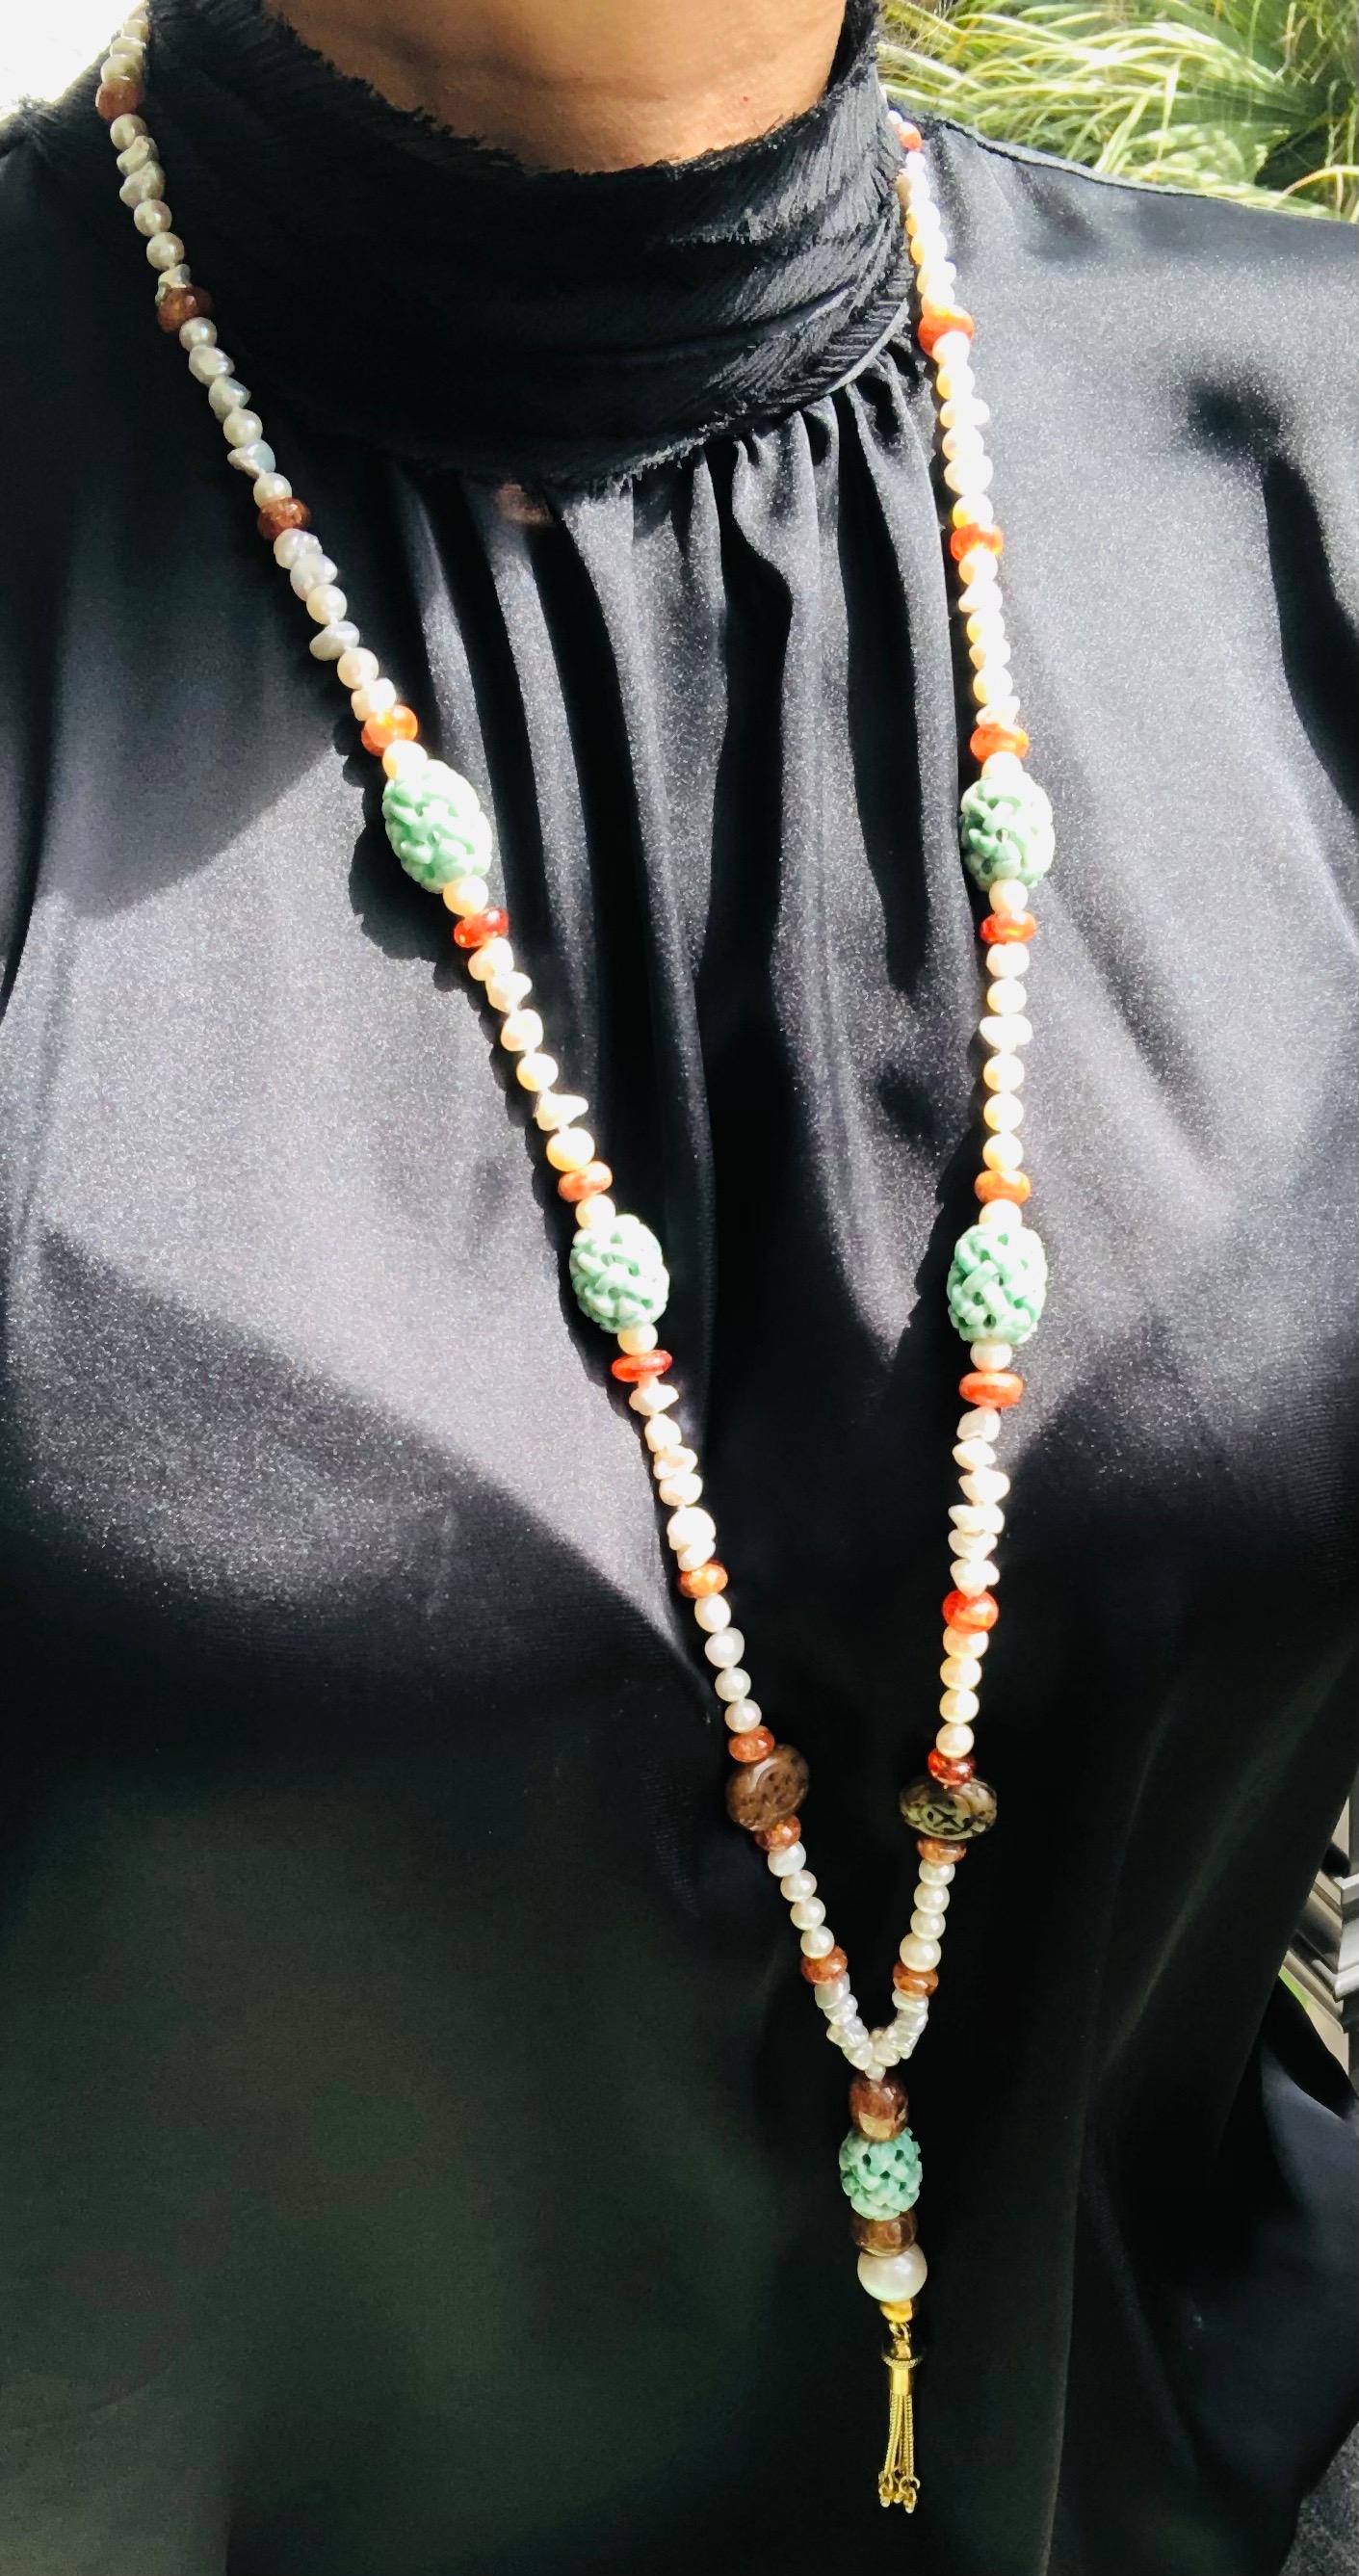 One-of-a-Kind
Wear-with-anything soft green and tobacco jade, creamy hessonite, and small baroque pearls combine in a one-of-a-kind necklace. 
The green jade is carved in the traditional melon pattern. The tobacco beads jade are carved flat